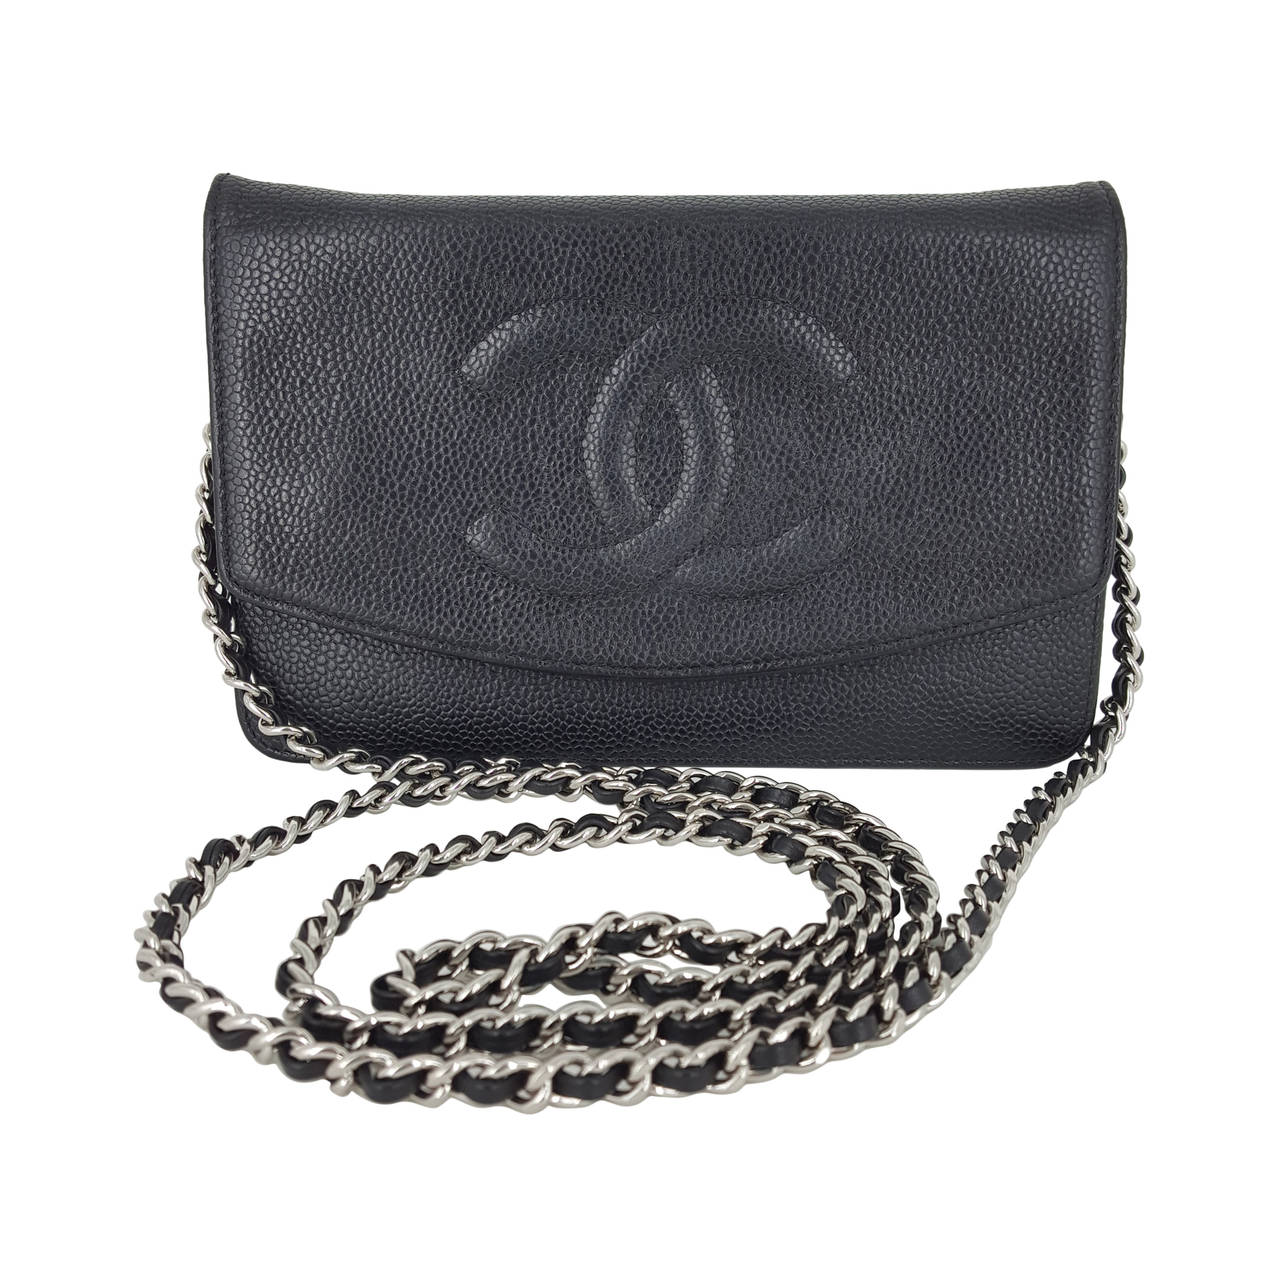 Chanel Black Caviar Wallet On A Chain With Silver Hardware.